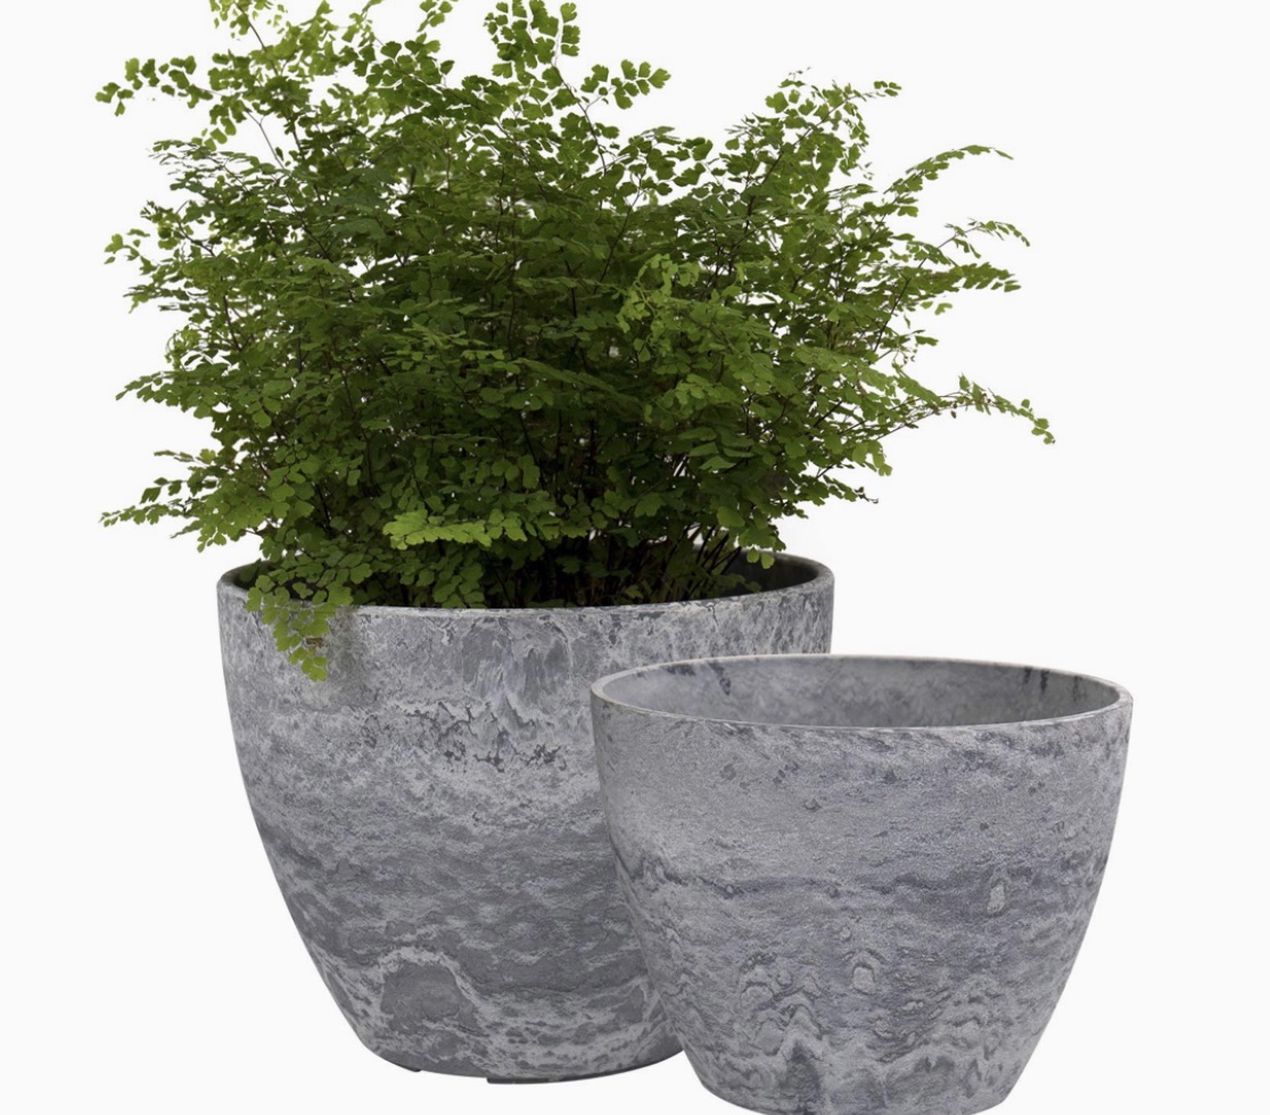 2 Flower Pots Indoor/Outdoor, Plant Container With Drain Hole, Gray Marble Pattern